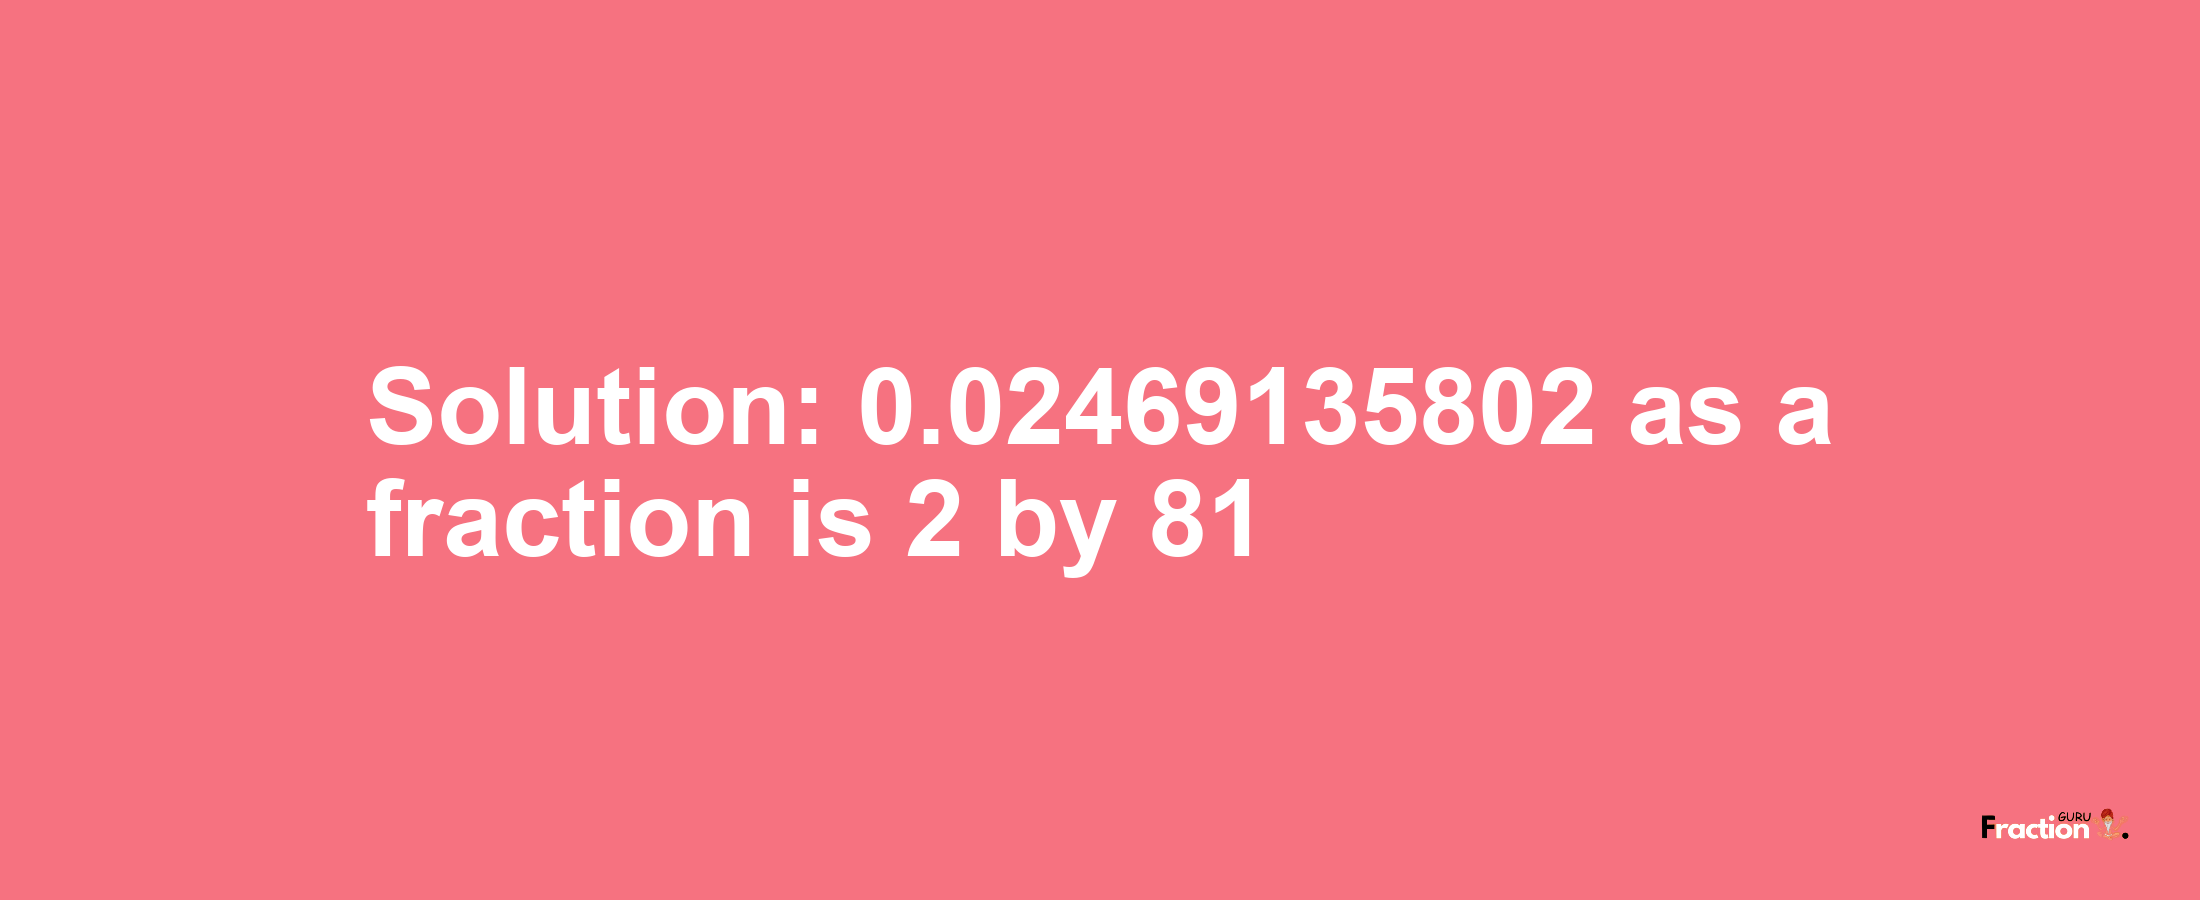 Solution:0.02469135802 as a fraction is 2/81